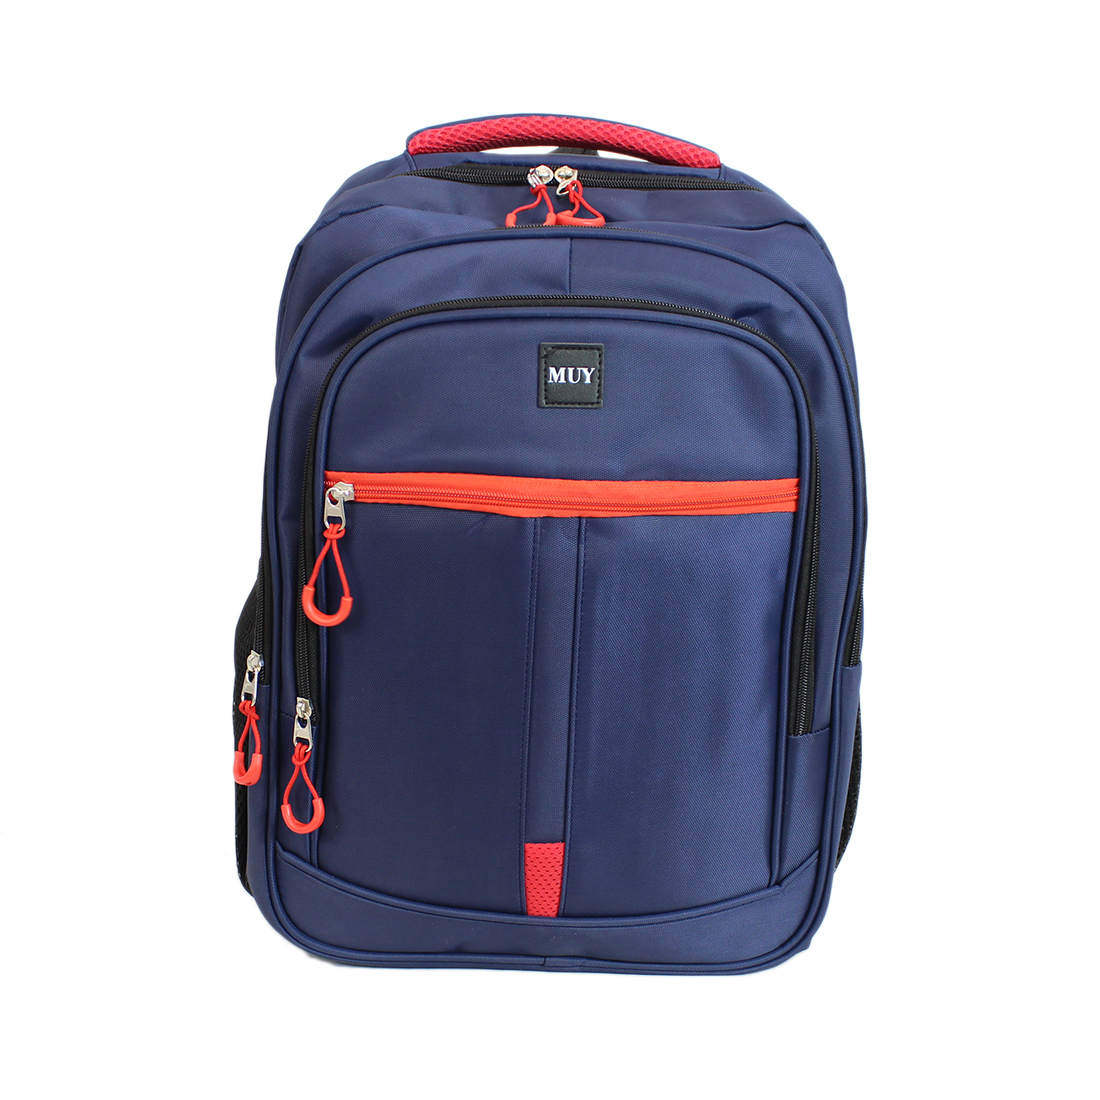 Plain backpack with zips infront